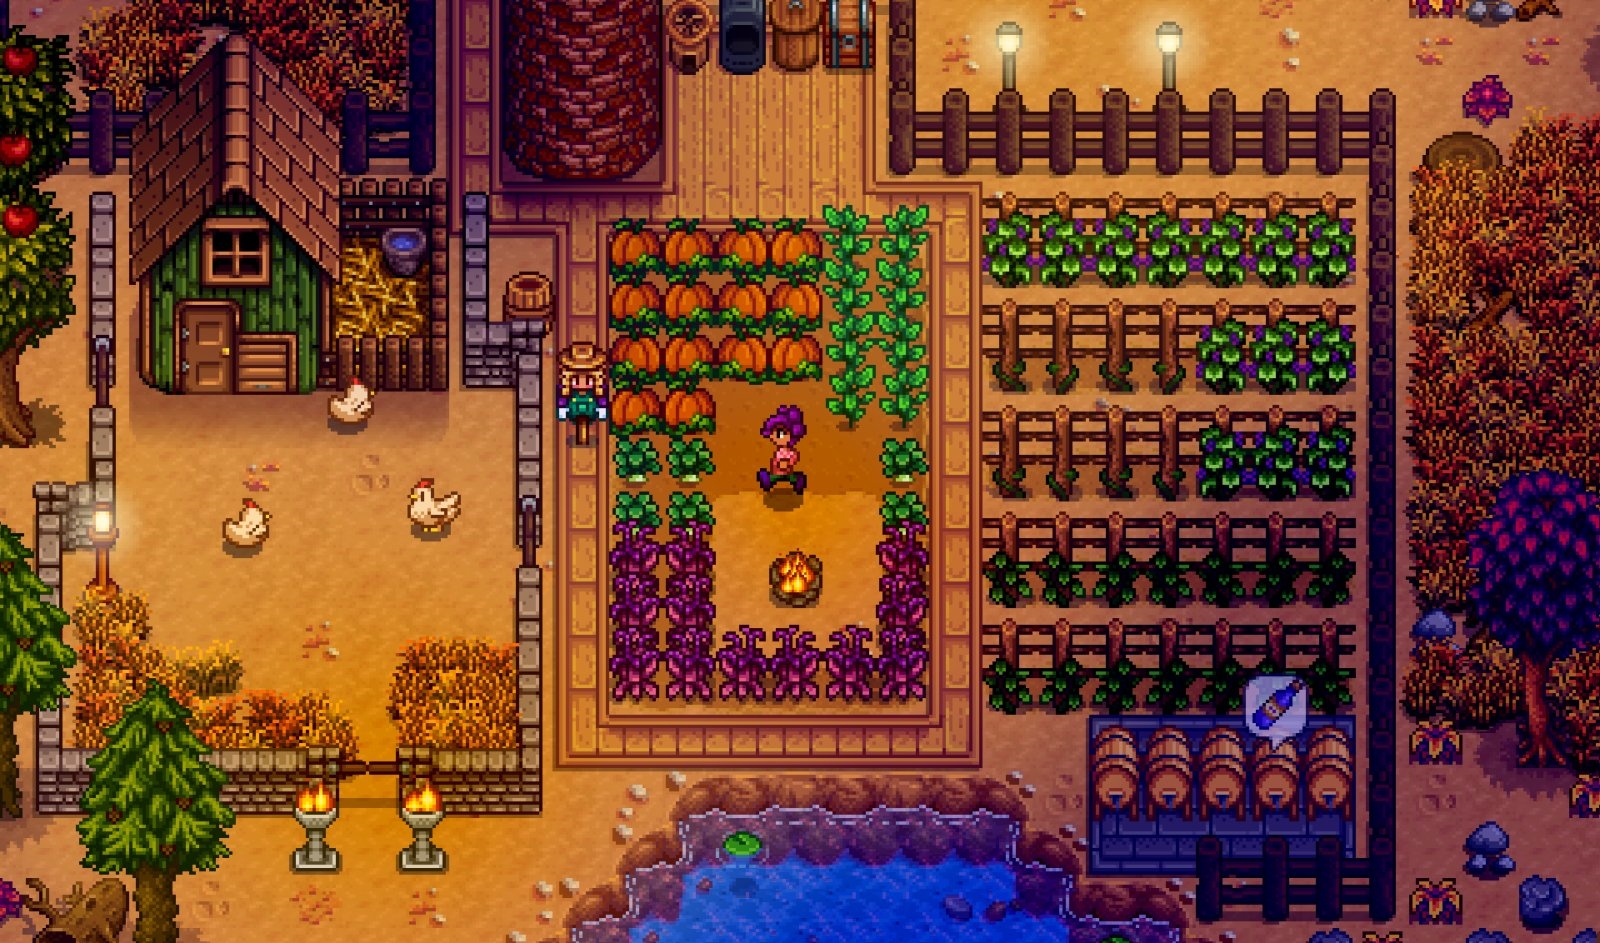 Farming RPG ‘Stardew Valley’ finally comes to Android | DeviceDaily.com